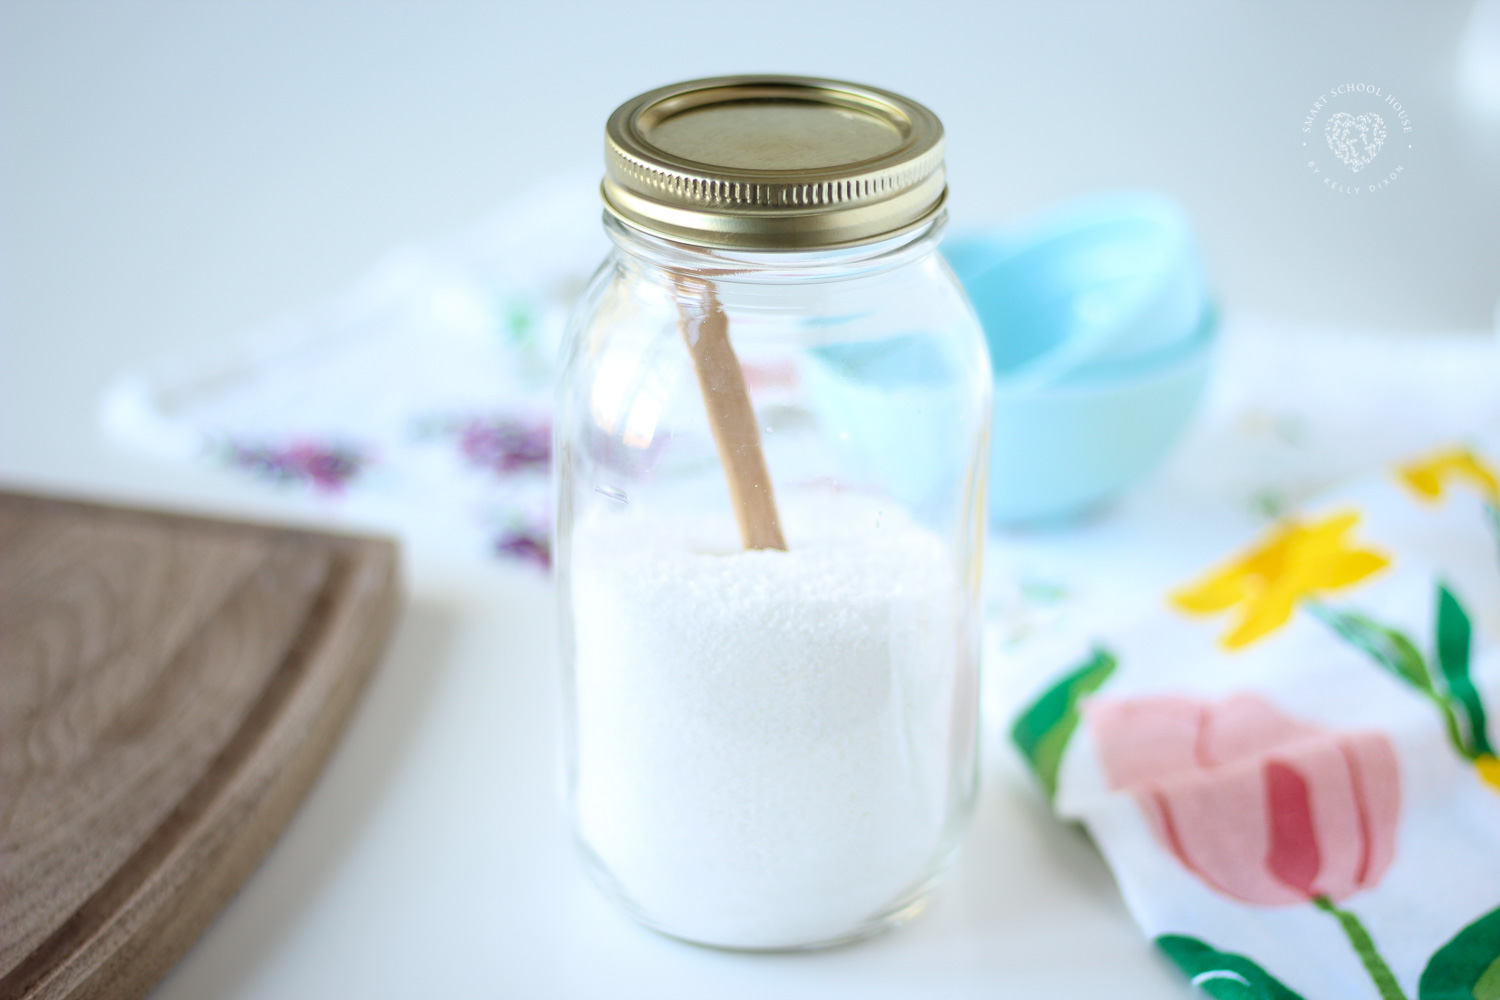 DIY laundry scent booster to keep clothes smelling clean and fresh longer. All natural 3-ingredient recipe with a long lasting scent.